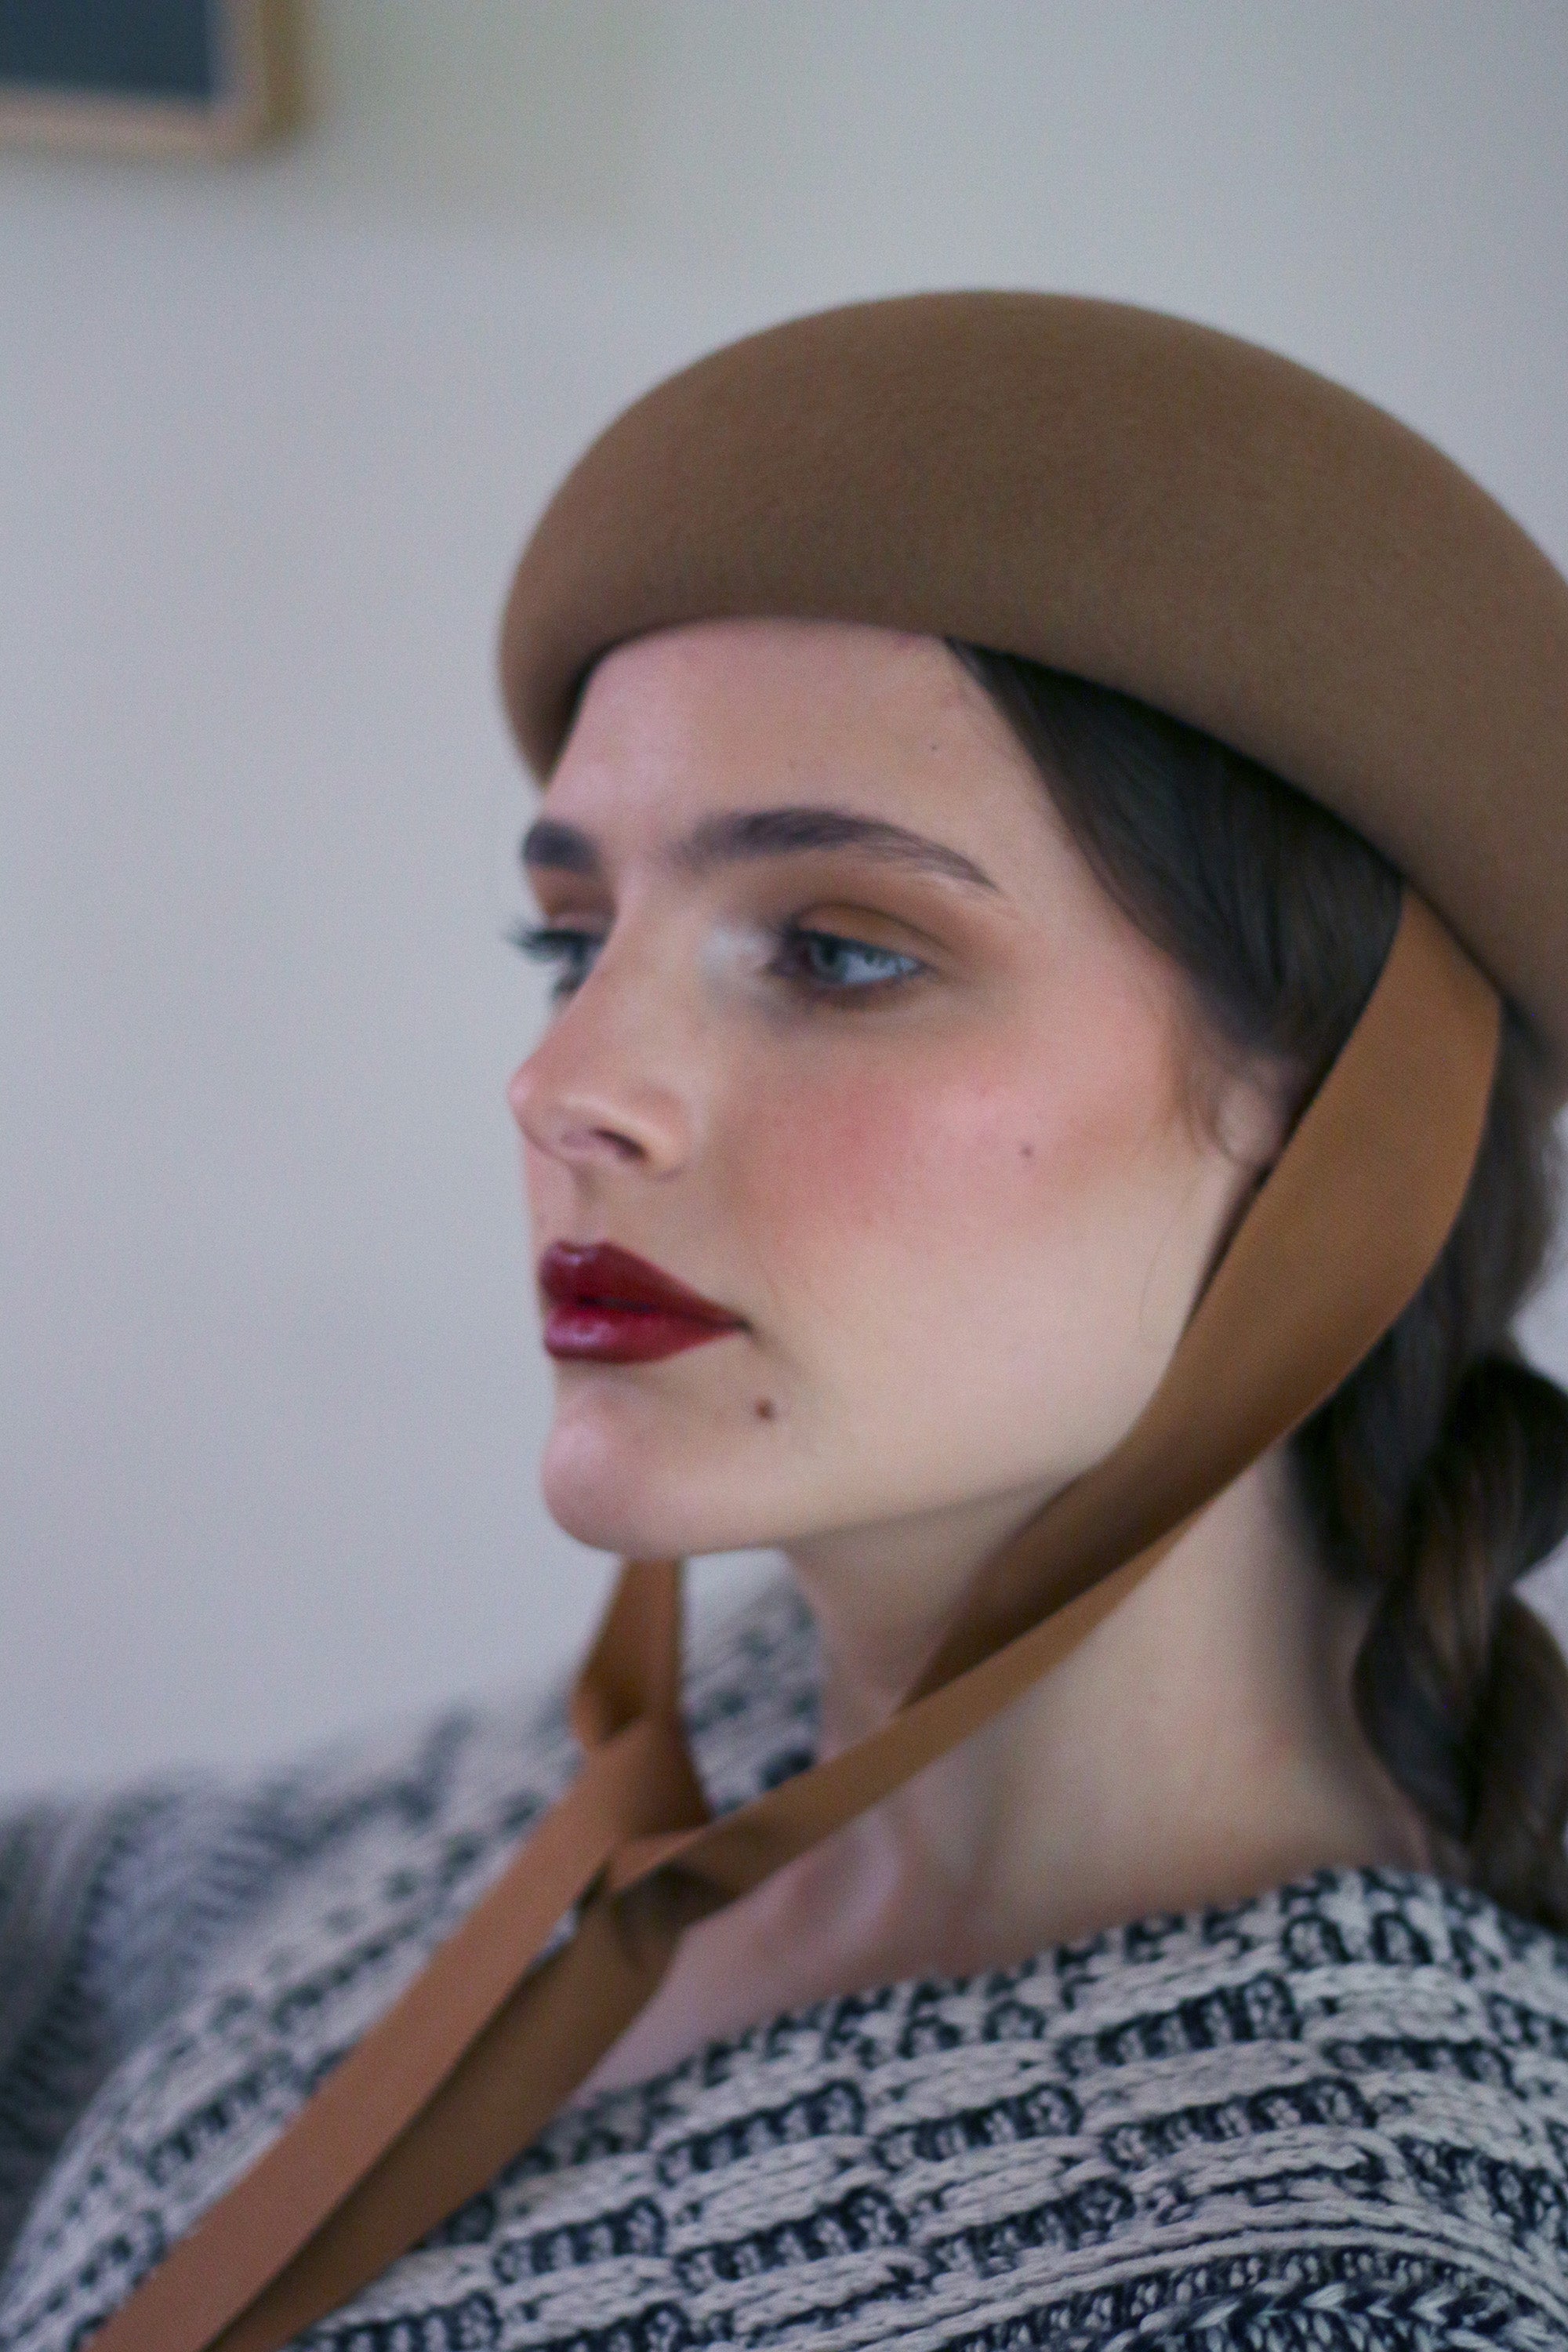 Charcoal wool felt button beret with chin strap ribbons